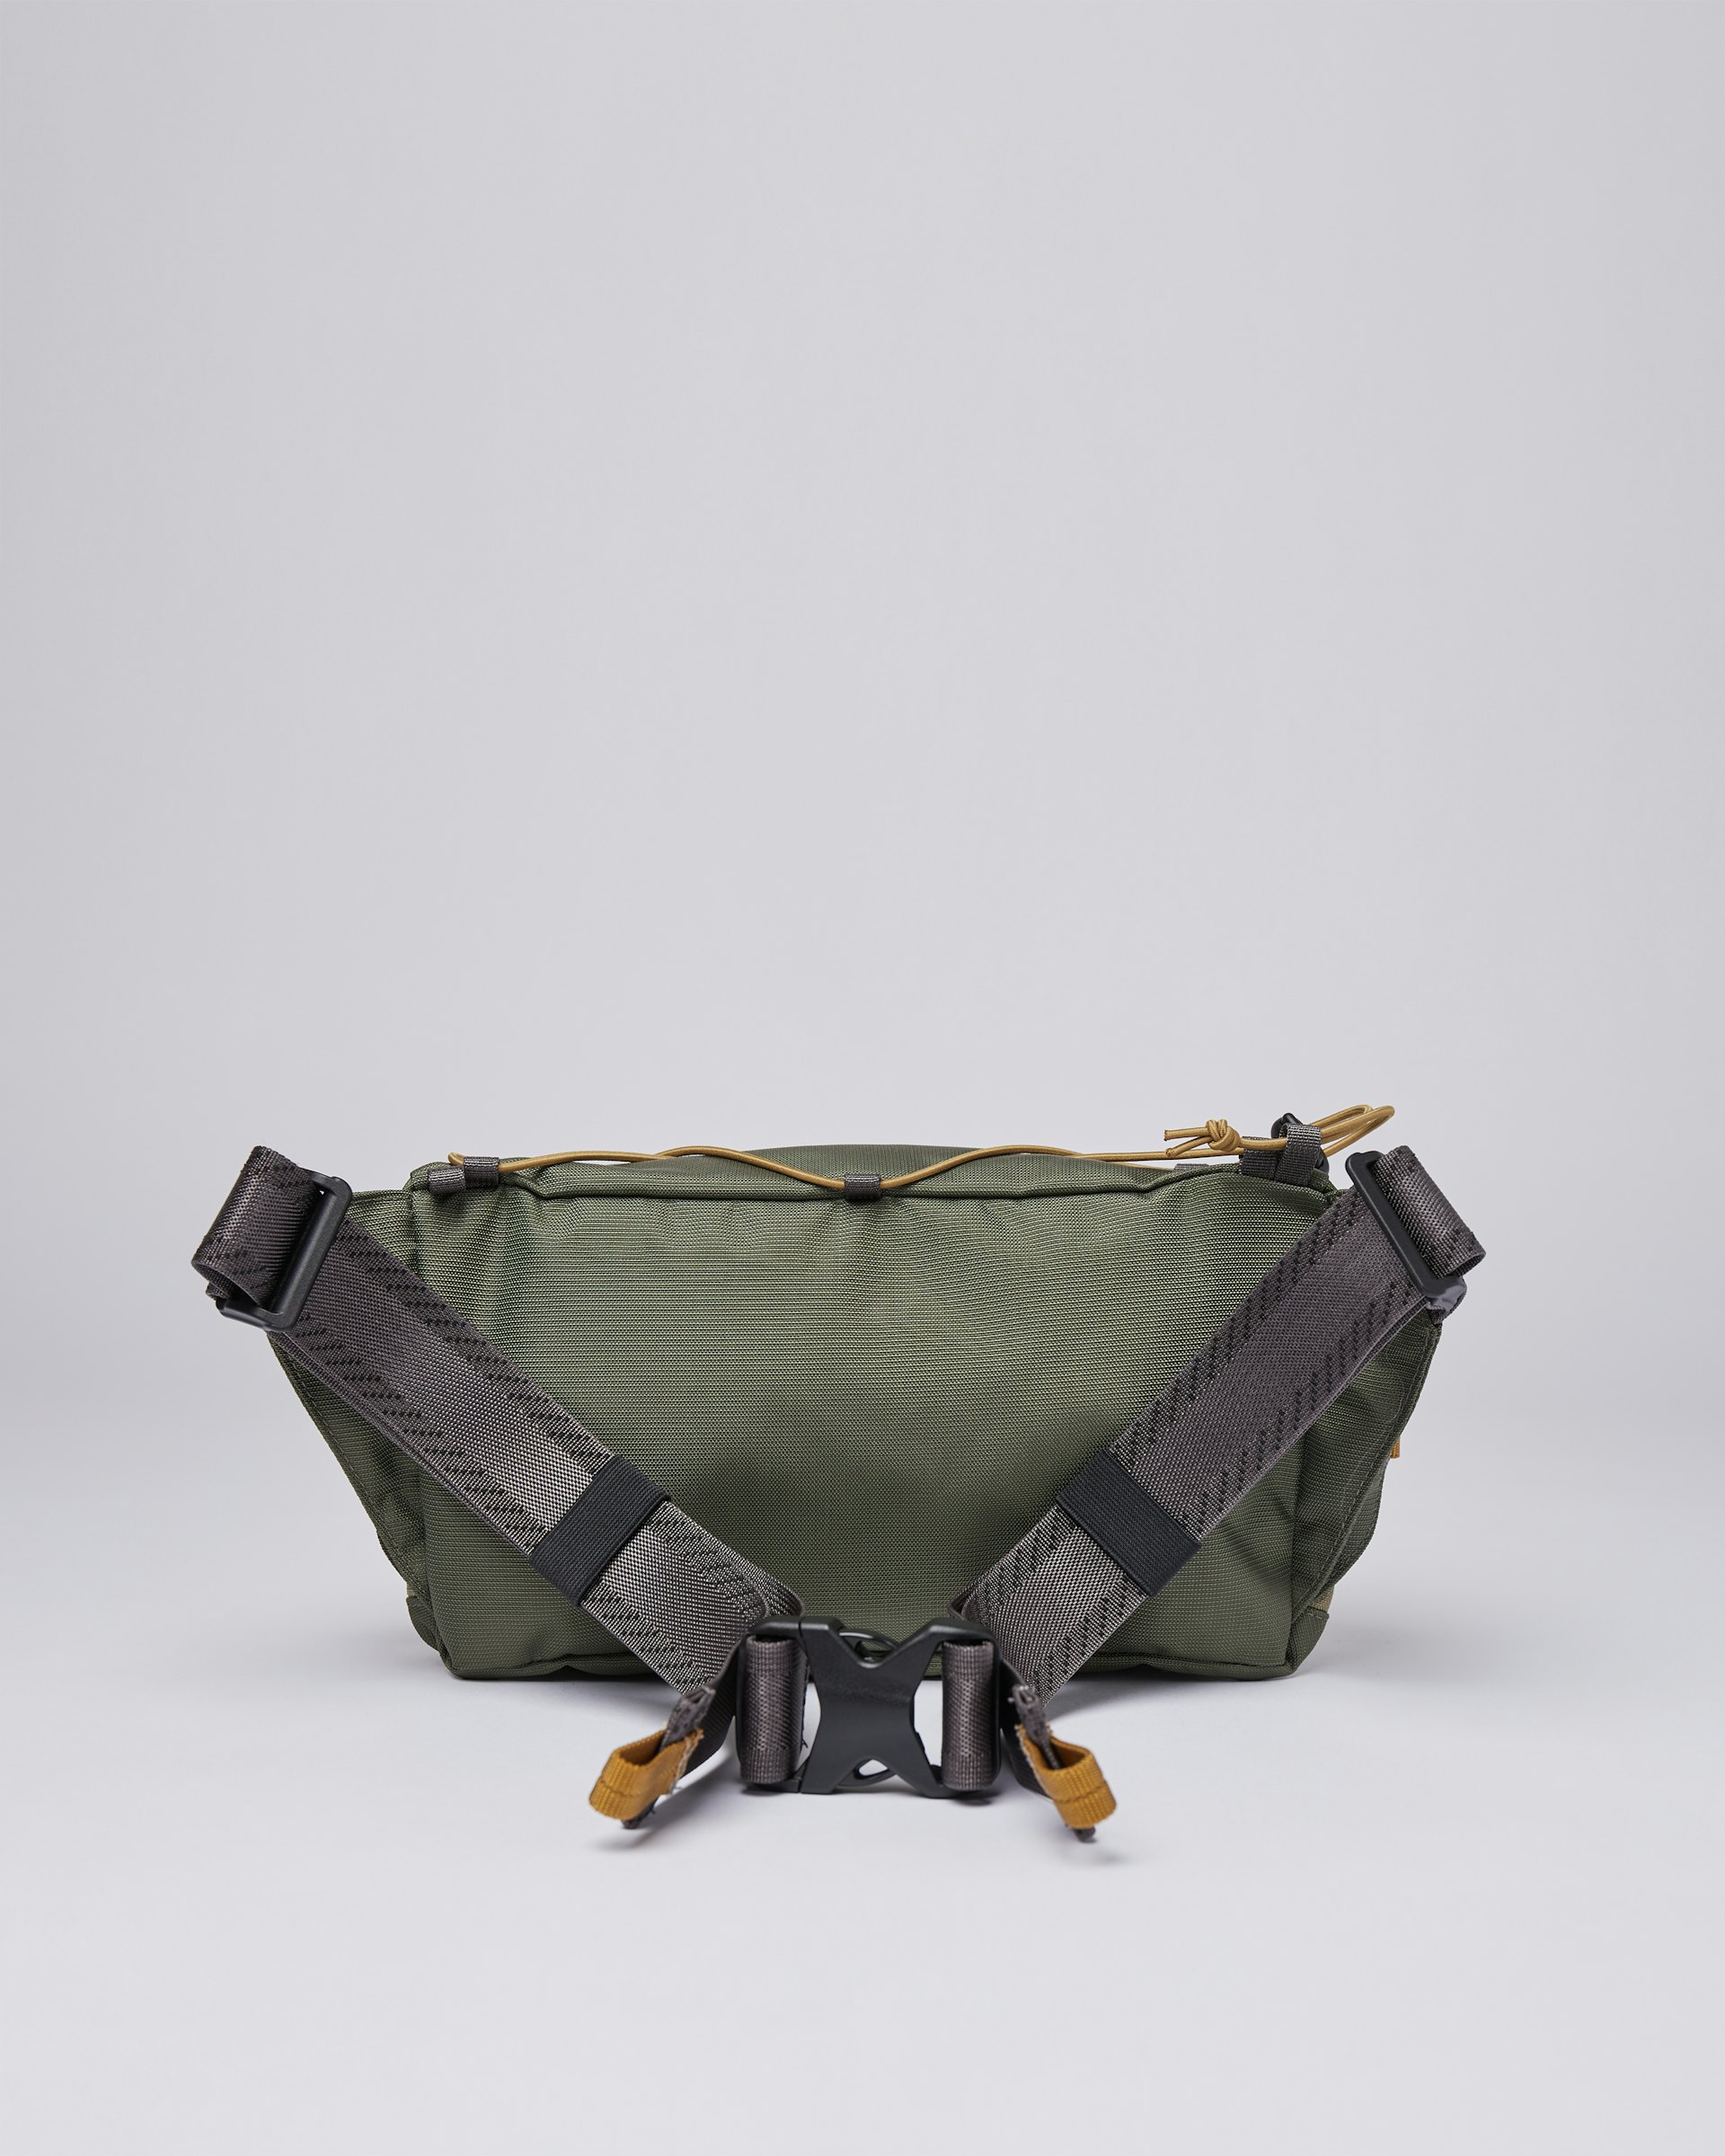 Allterrain Hike belongs to the category Bum bags and is in color green & green (3 of 7)